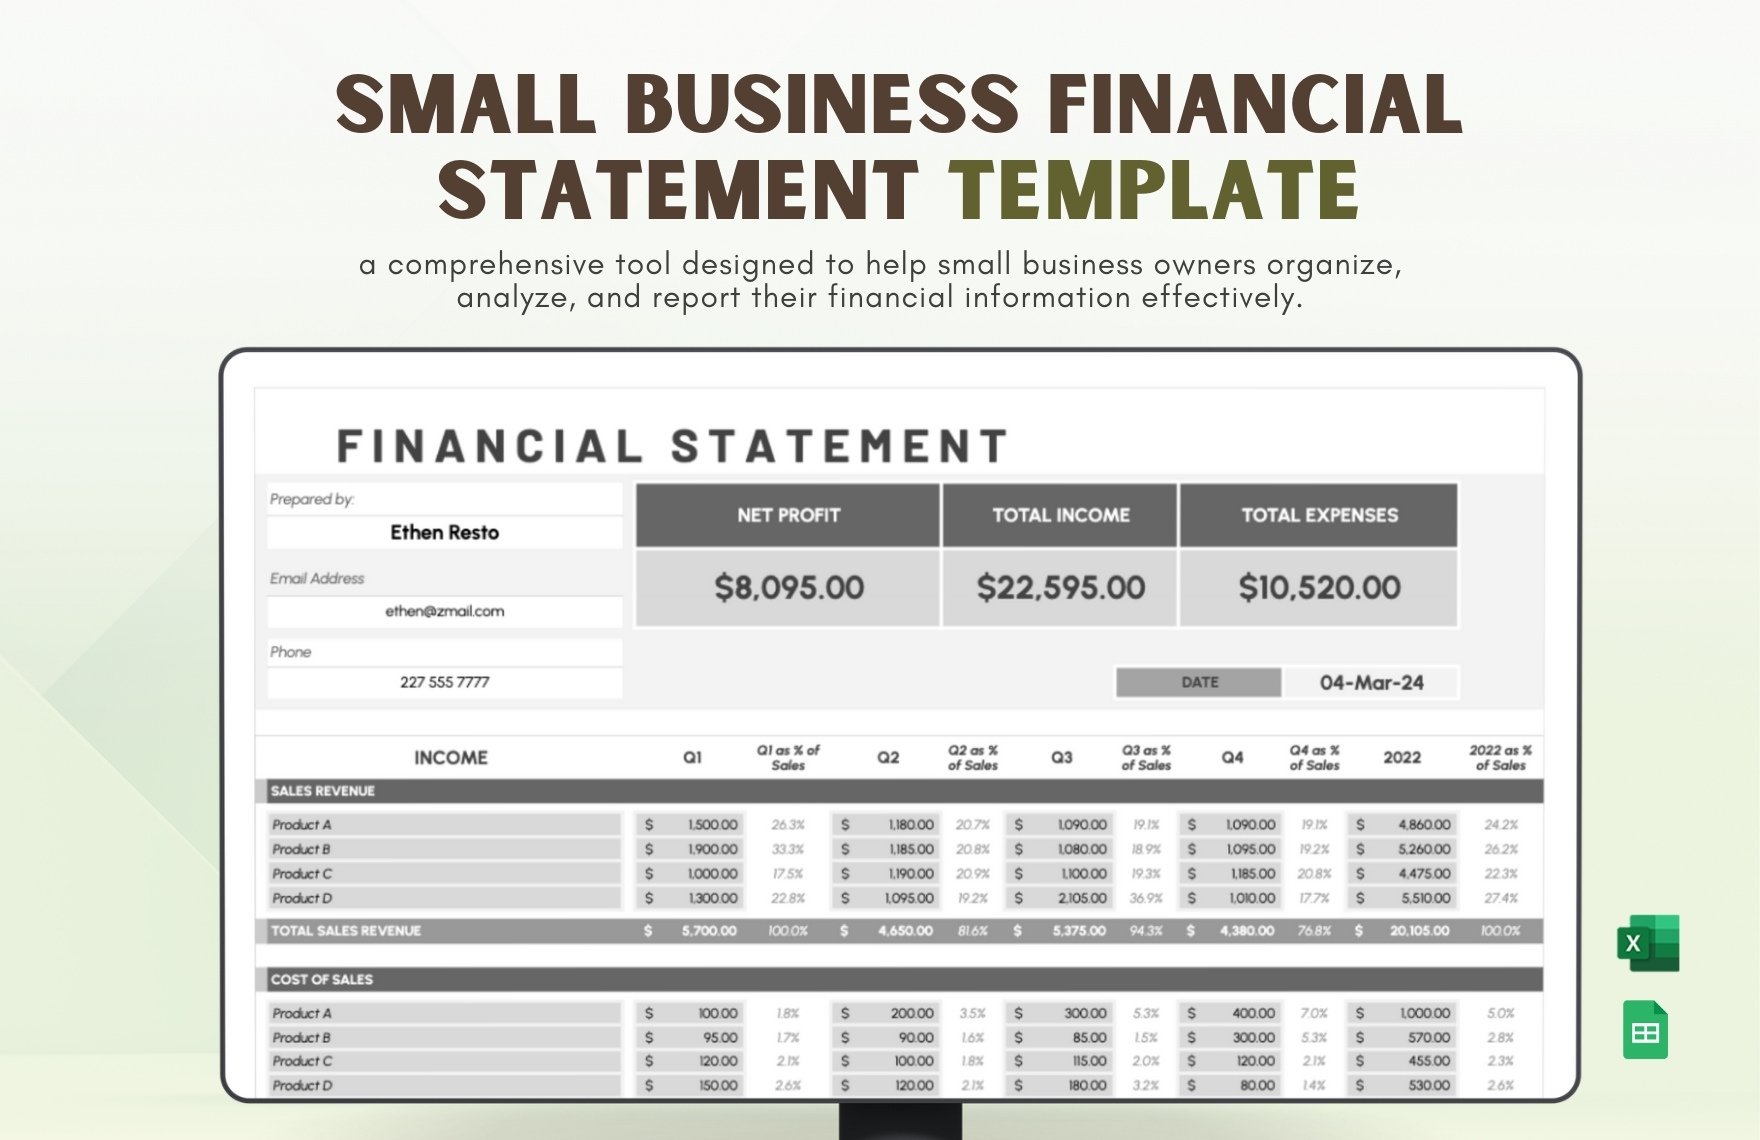 How to Make Financial Statements for Small Businesses